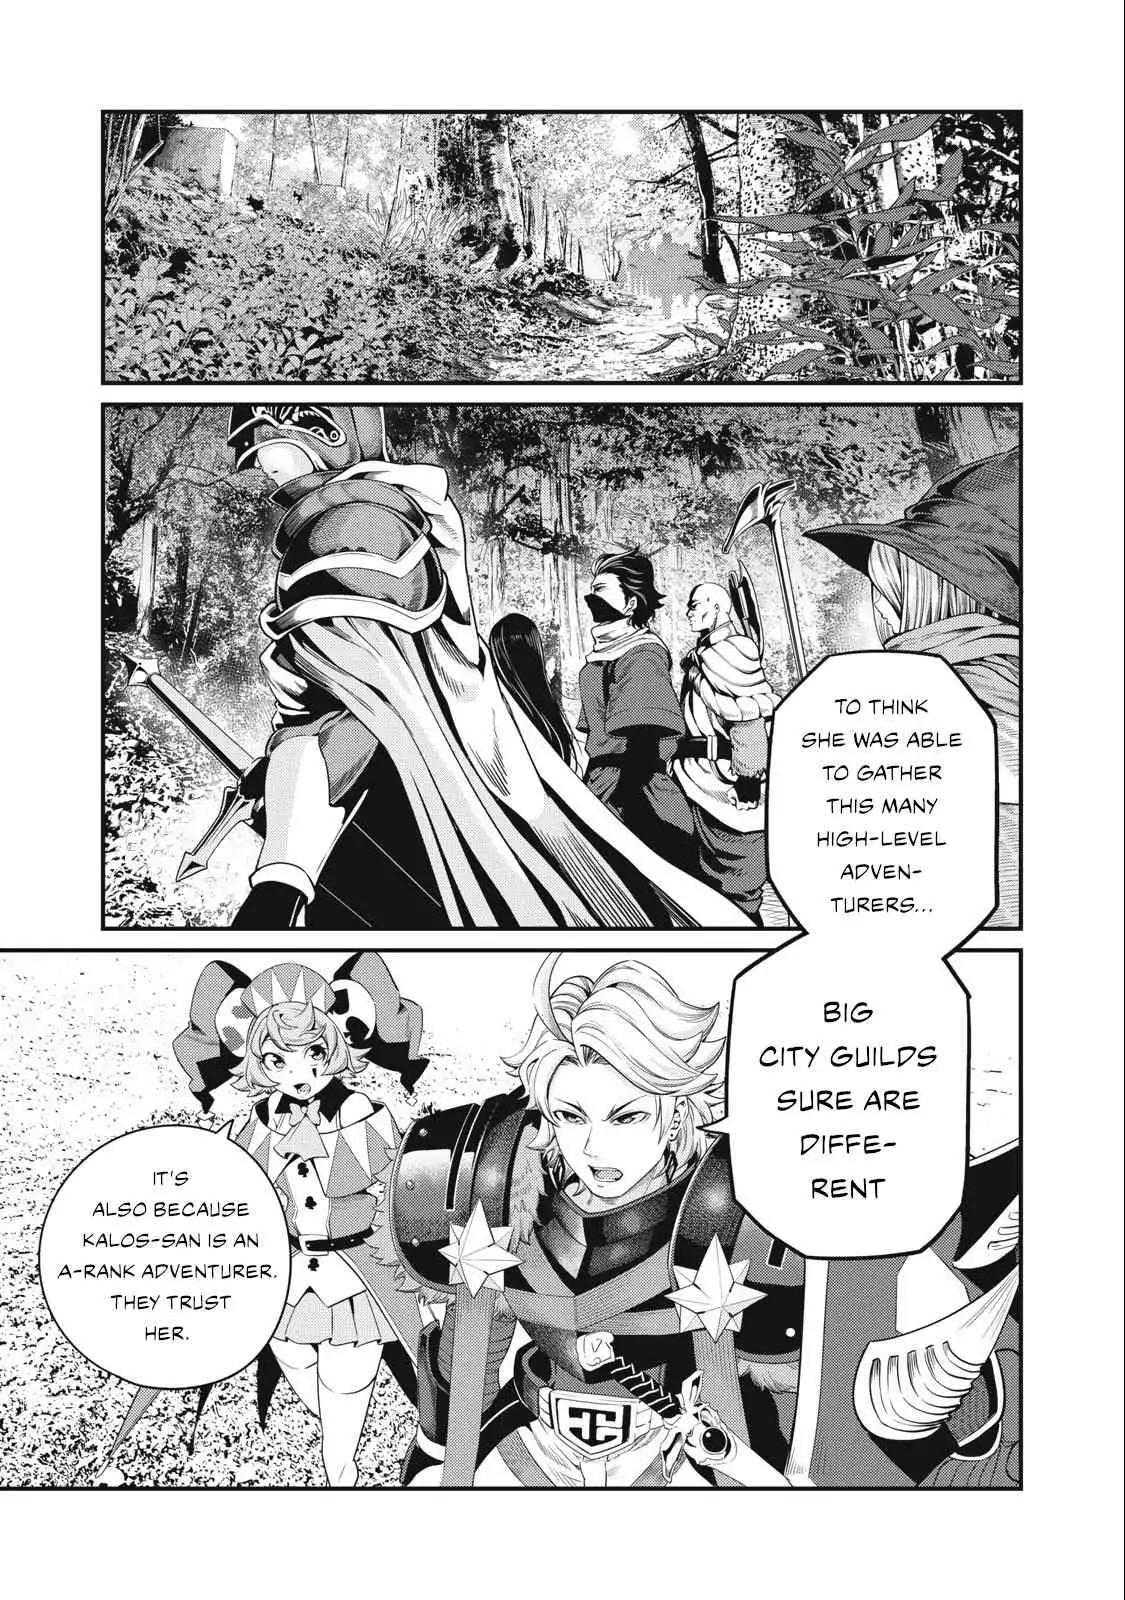 The Exiled Reincarnated Heavy Knight Is Unrivaled In Game Knowledge Chapter 49